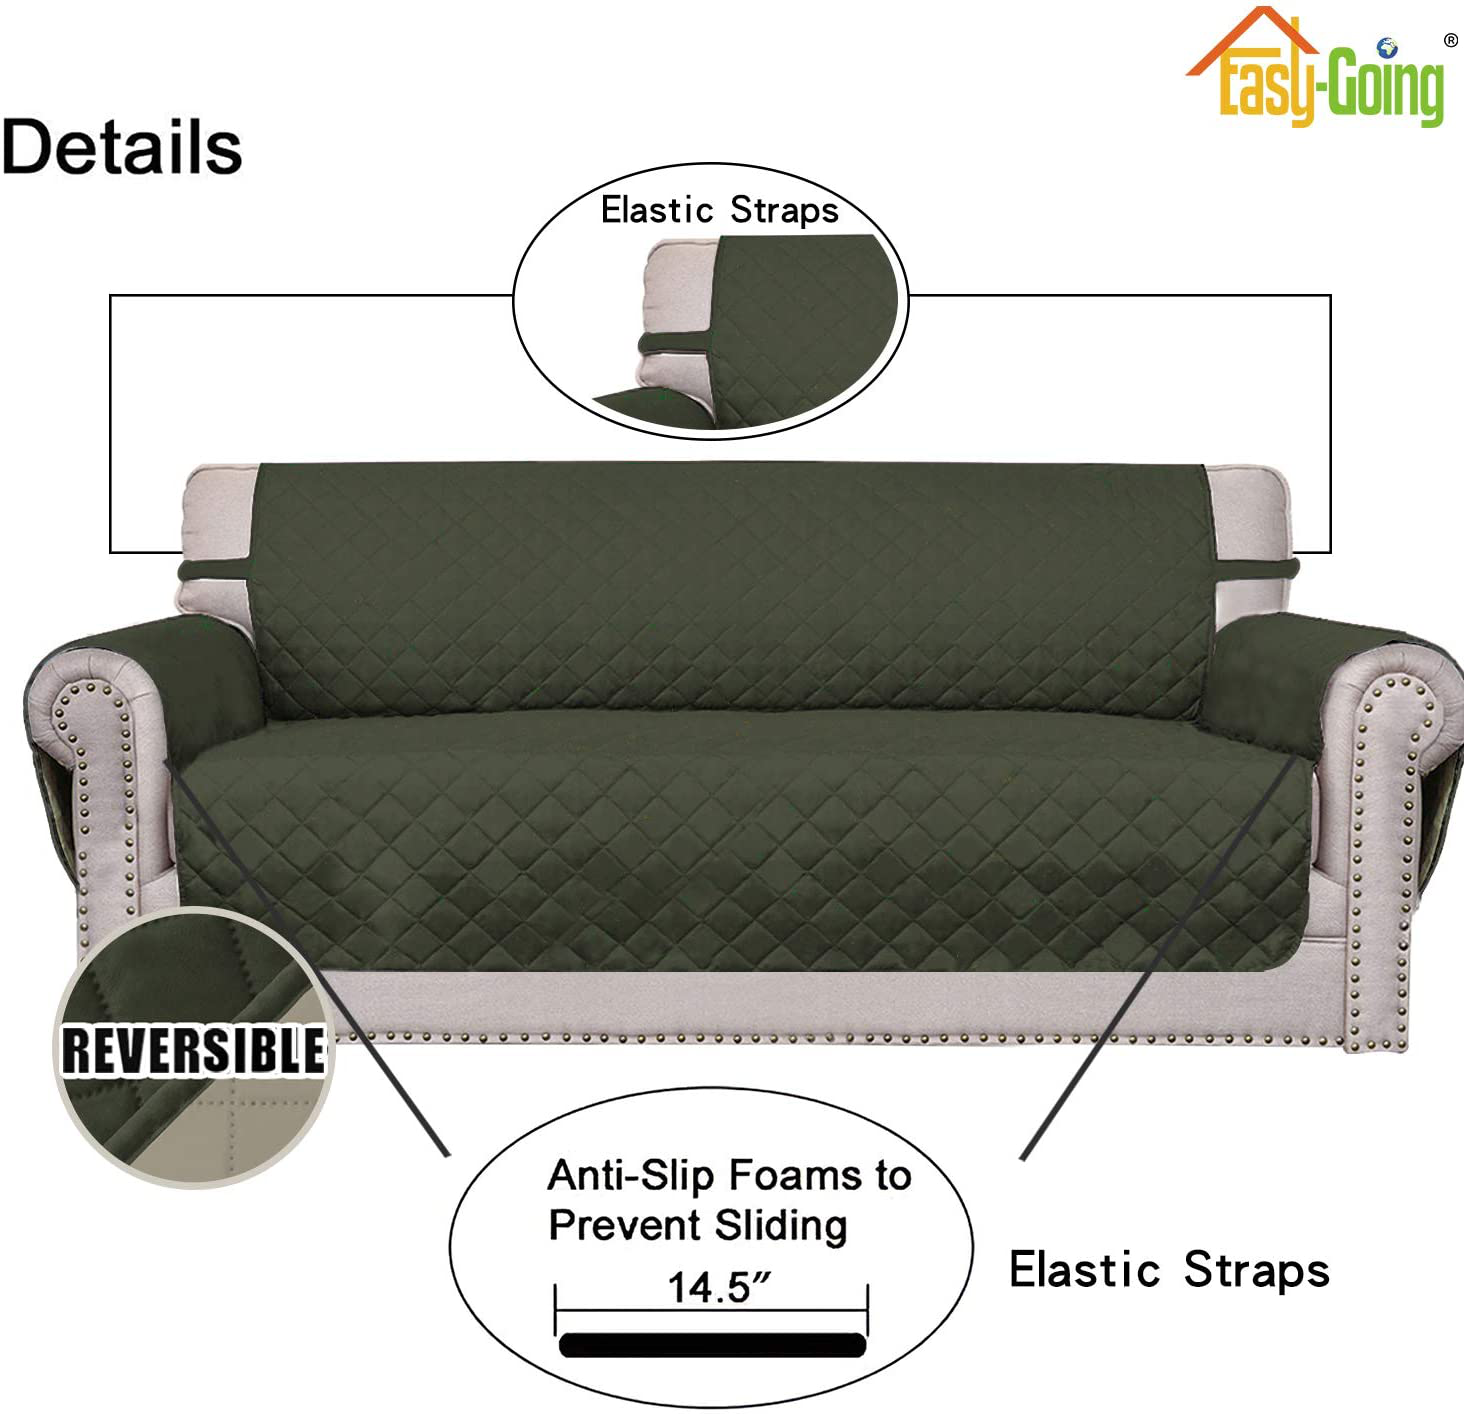 Easy-Going Sofa Slipcover Reversible Sofa Cover Water Resistant Couch Cover Furniture Protector with Elastic Straps for Pets Kids Children Dog Cat(Oversized Sofa, Light Gray/Light Gray)